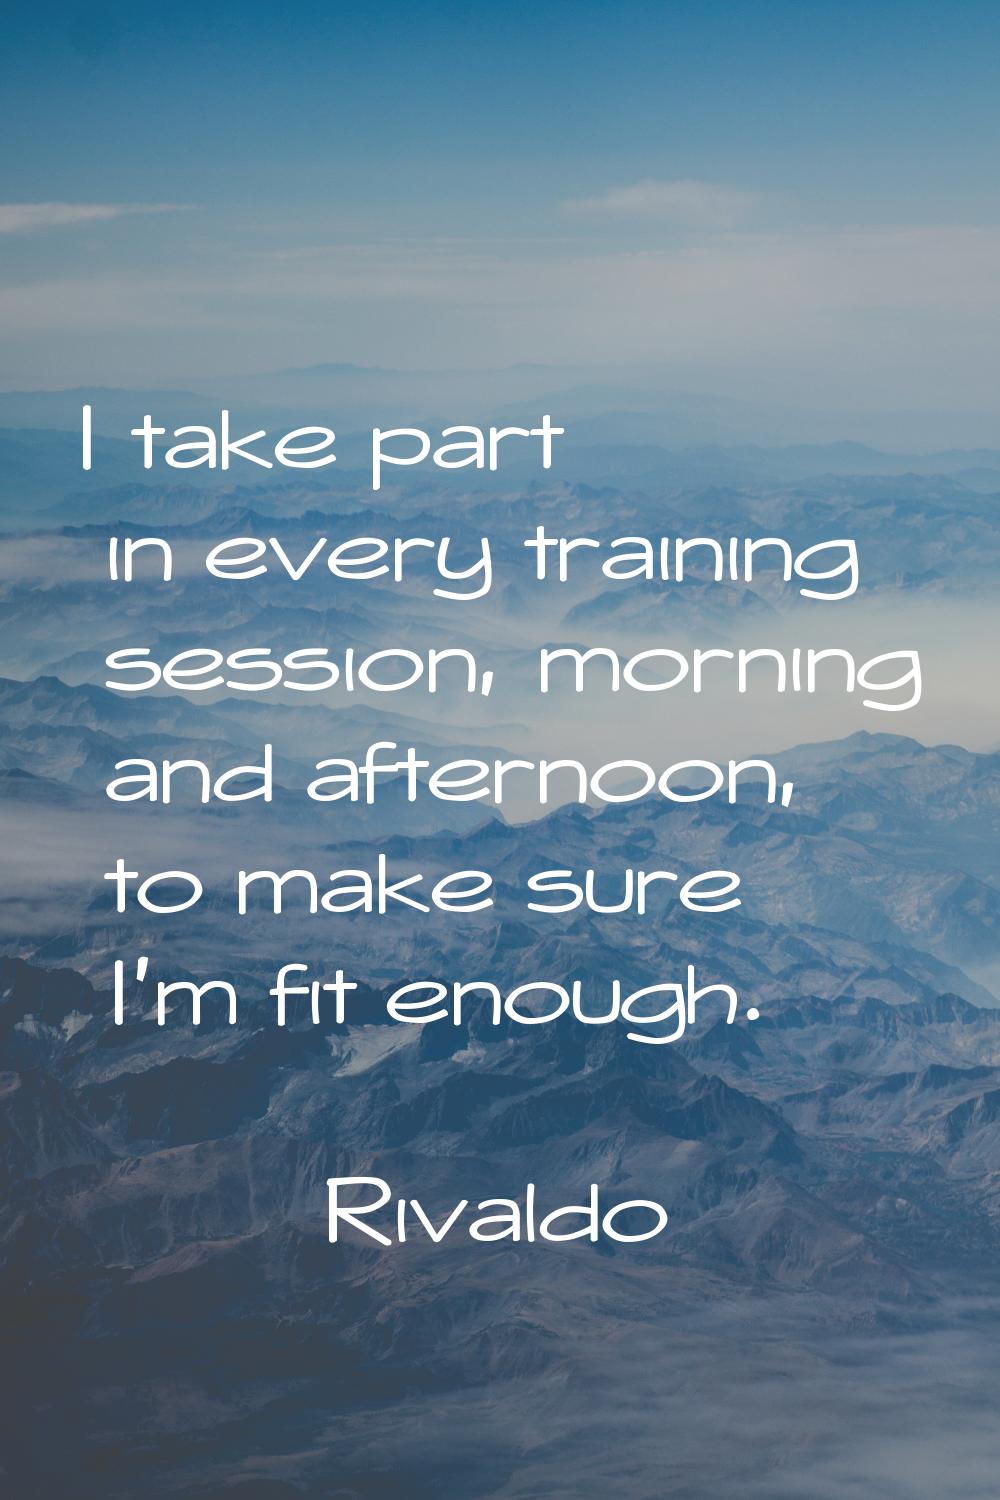 I take part in every training session, morning and afternoon, to make sure I'm fit enough.